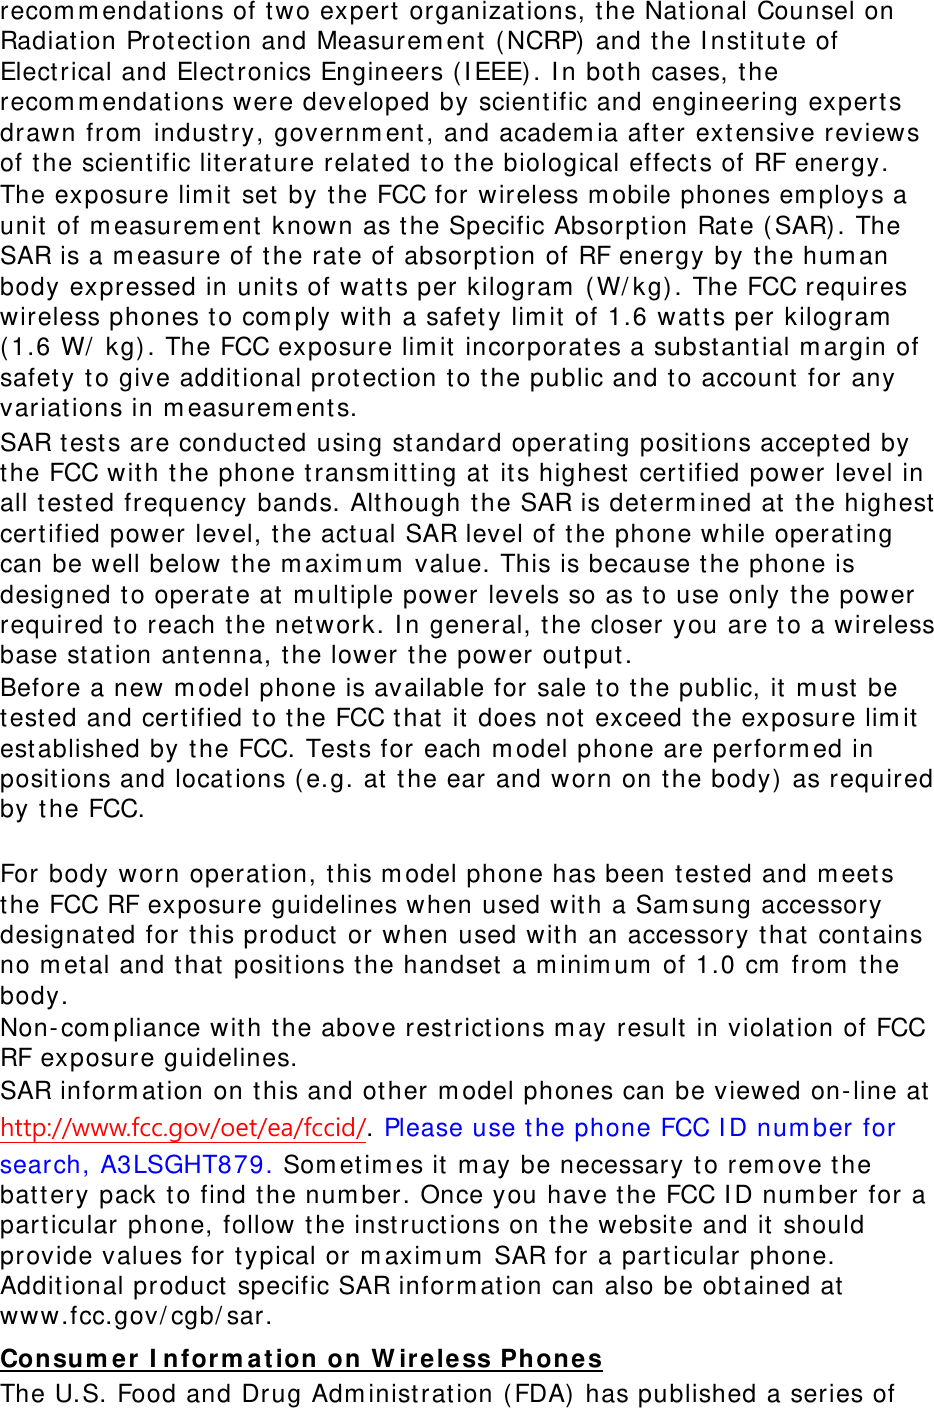 recommendations of two expert organizations, the National Counsel on Radiation Protection and Measurement (NCRP) and the Institute of Electrical and Electronics Engineers (IEEE). In both cases, the recommendations were developed by scientific and engineering experts drawn from industry, government, and academia after extensive reviews of the scientific literature related to the biological effects of RF energy. The exposure limit set by the FCC for wireless mobile phones employs a unit of measurement known as the Specific Absorption Rate (SAR). The SAR is a measure of the rate of absorption of RF energy by the human body expressed in units of watts per kilogram (W/kg). The FCC requires wireless phones to comply with a safety limit of 1.6 watts per kilogram (1.6 W/ kg). The FCC exposure limit incorporates a substantial margin of safety to give additional protection to the public and to account for any variations in measurements. SAR tests are conducted using standard operating positions accepted by the FCC with the phone transmitting at its highest certified power level in all tested frequency bands. Although the SAR is determined at the highest certified power level, the actual SAR level of the phone while operating can be well below the maximum value. This is because the phone is designed to operate at multiple power levels so as to use only the power required to reach the network. In general, the closer you are to a wireless base station antenna, the lower the power output. Before a new model phone is available for sale to the public, it must be tested and certified to the FCC that it does not exceed the exposure limit established by the FCC. Tests for each model phone are performed in positions and locations (e.g. at the ear and worn on the body) as required by the FCC.    For body worn operation, this model phone has been tested and meets the FCC RF exposure guidelines when used with a Samsung accessory designated for this product or when used with an accessory that contains no metal and that positions the handset a minimum of 1.0 cm from the body.  Non-compliance with the above restrictions may result in violation of FCC RF exposure guidelines. SAR information on this and other model phones can be viewed on-line at http://www.fcc.gov/oet/ea/fccid/. Please use the phone FCC ID number for search, A3LSGHT879. Sometimes it may be necessary to remove the battery pack to find the number. Once you have the FCC ID number for a particular phone, follow the instructions on the website and it should provide values for typical or maximum SAR for a particular phone. Additional product specific SAR information can also be obtained at www.fcc.gov/cgb/sar. Consumer Information on Wireless Phones The U.S. Food and Drug Administration (FDA) has published a series of 